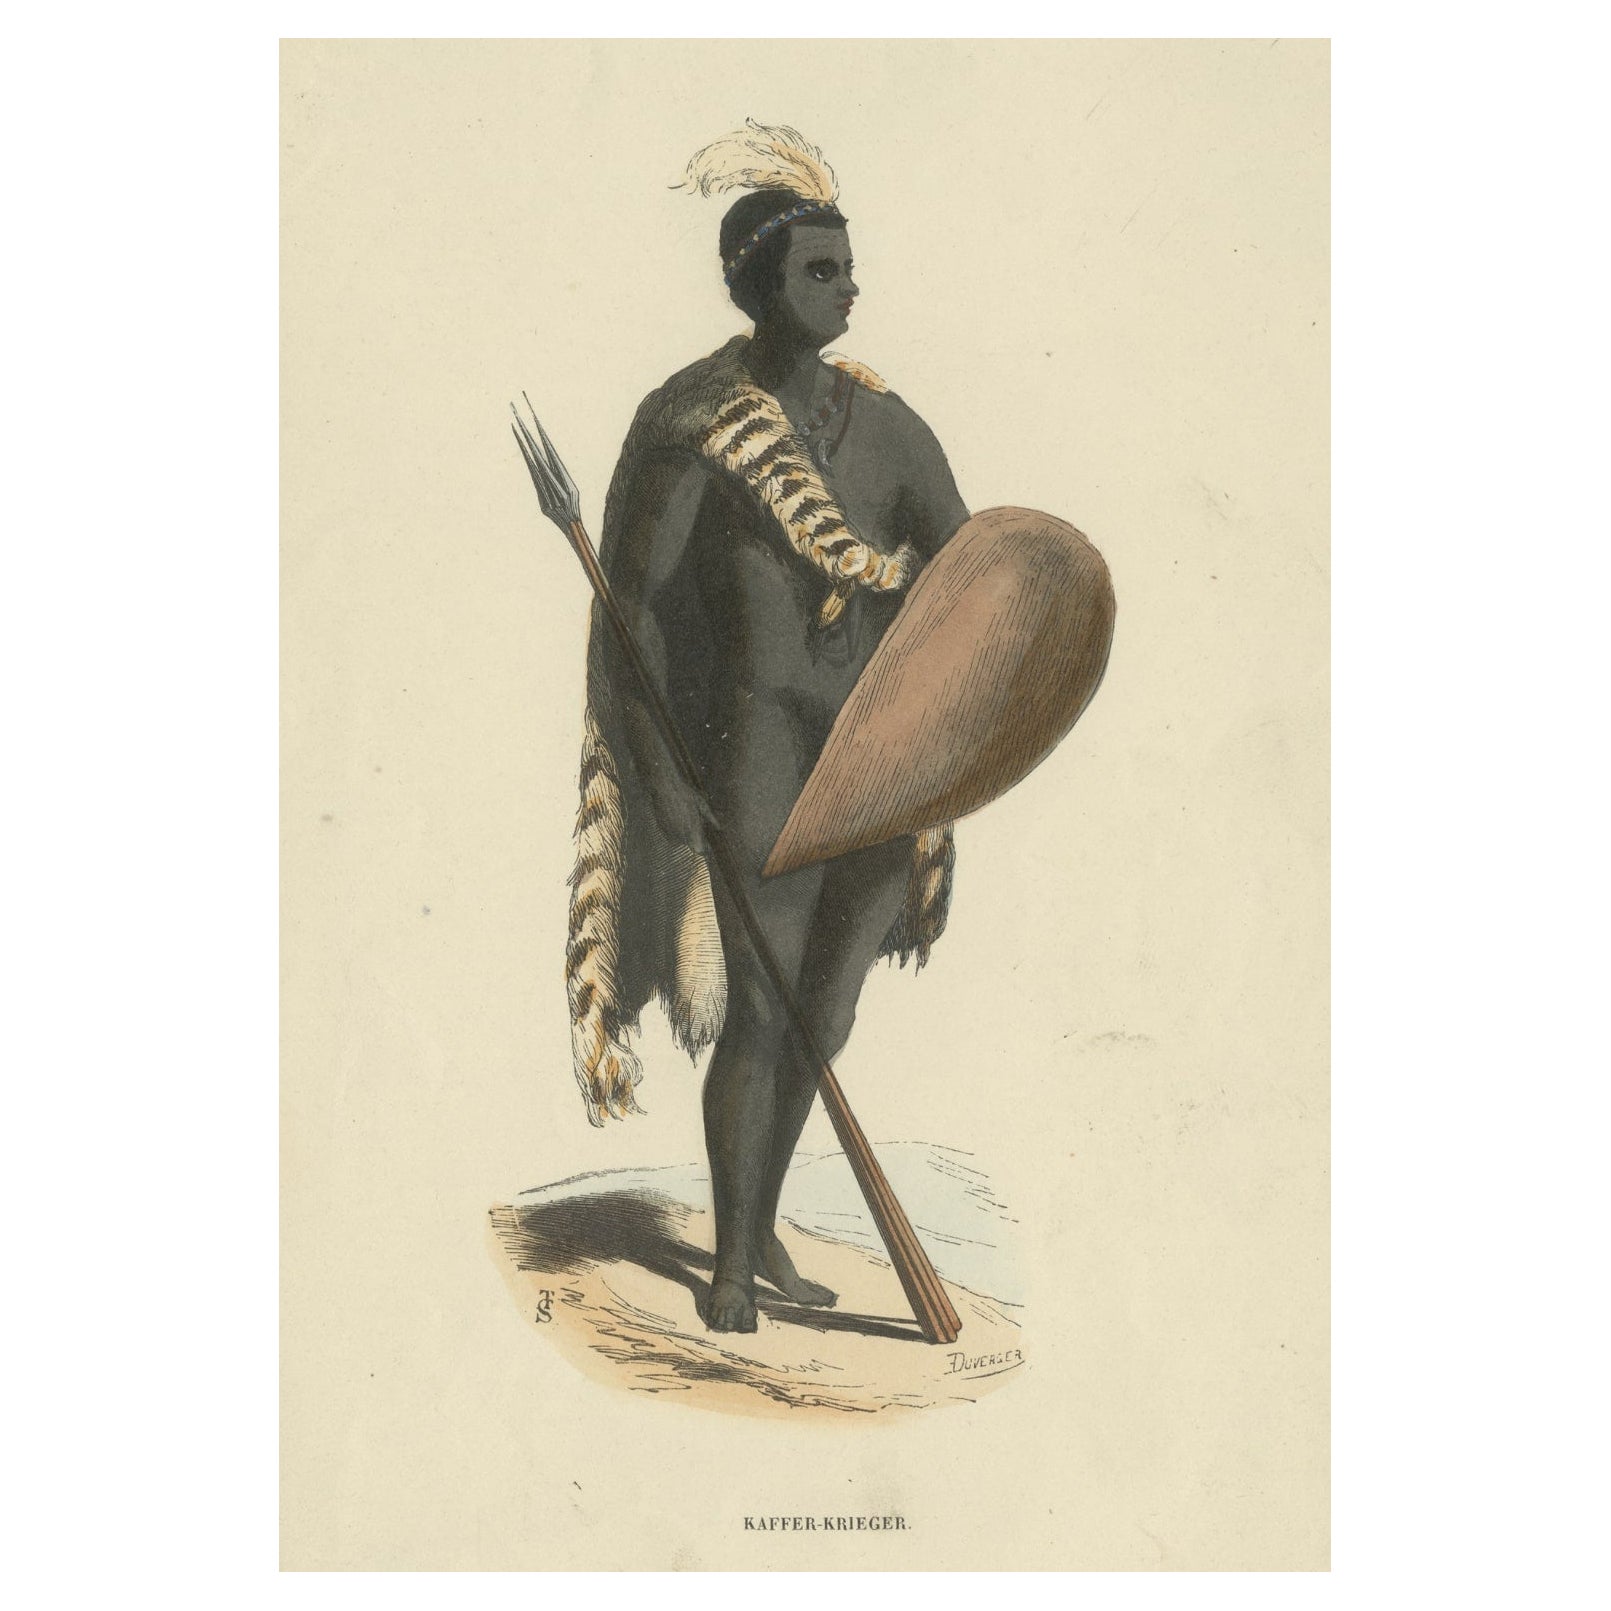 Original Hand-Colored Antique Print of an African Warrior, ca.1845